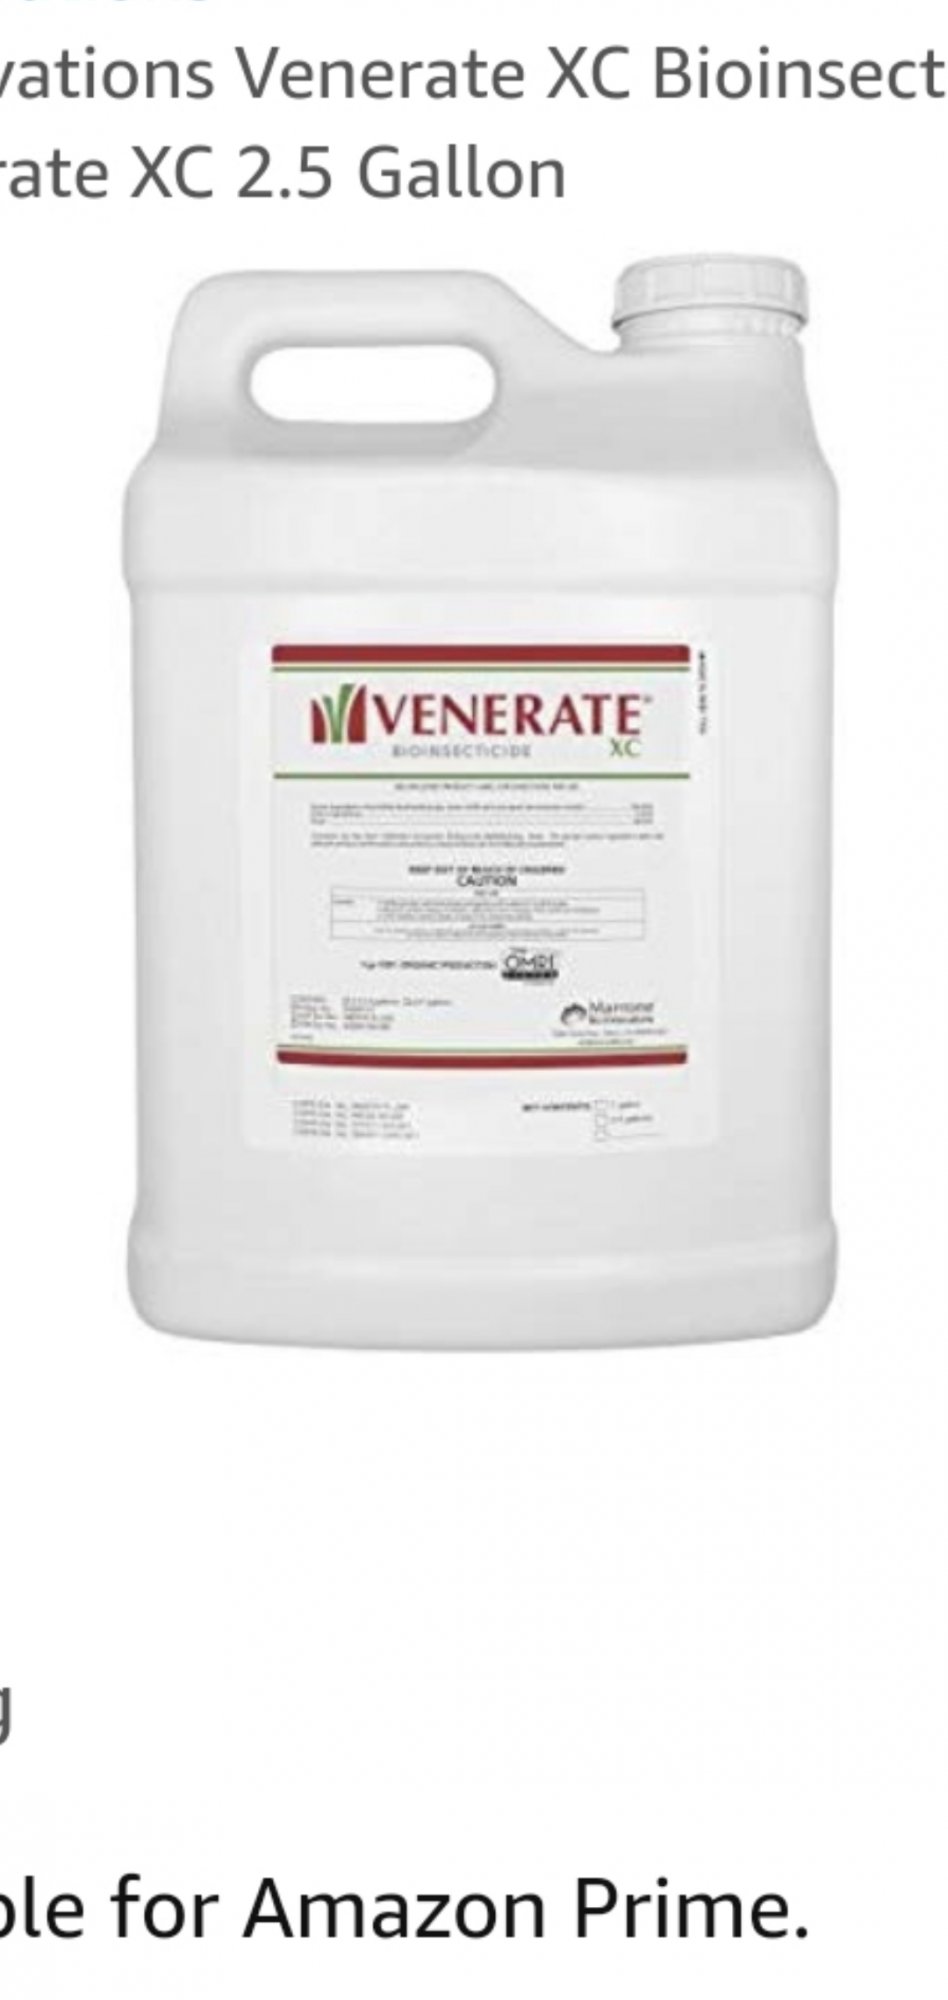 Need help on how to mix new insecticide